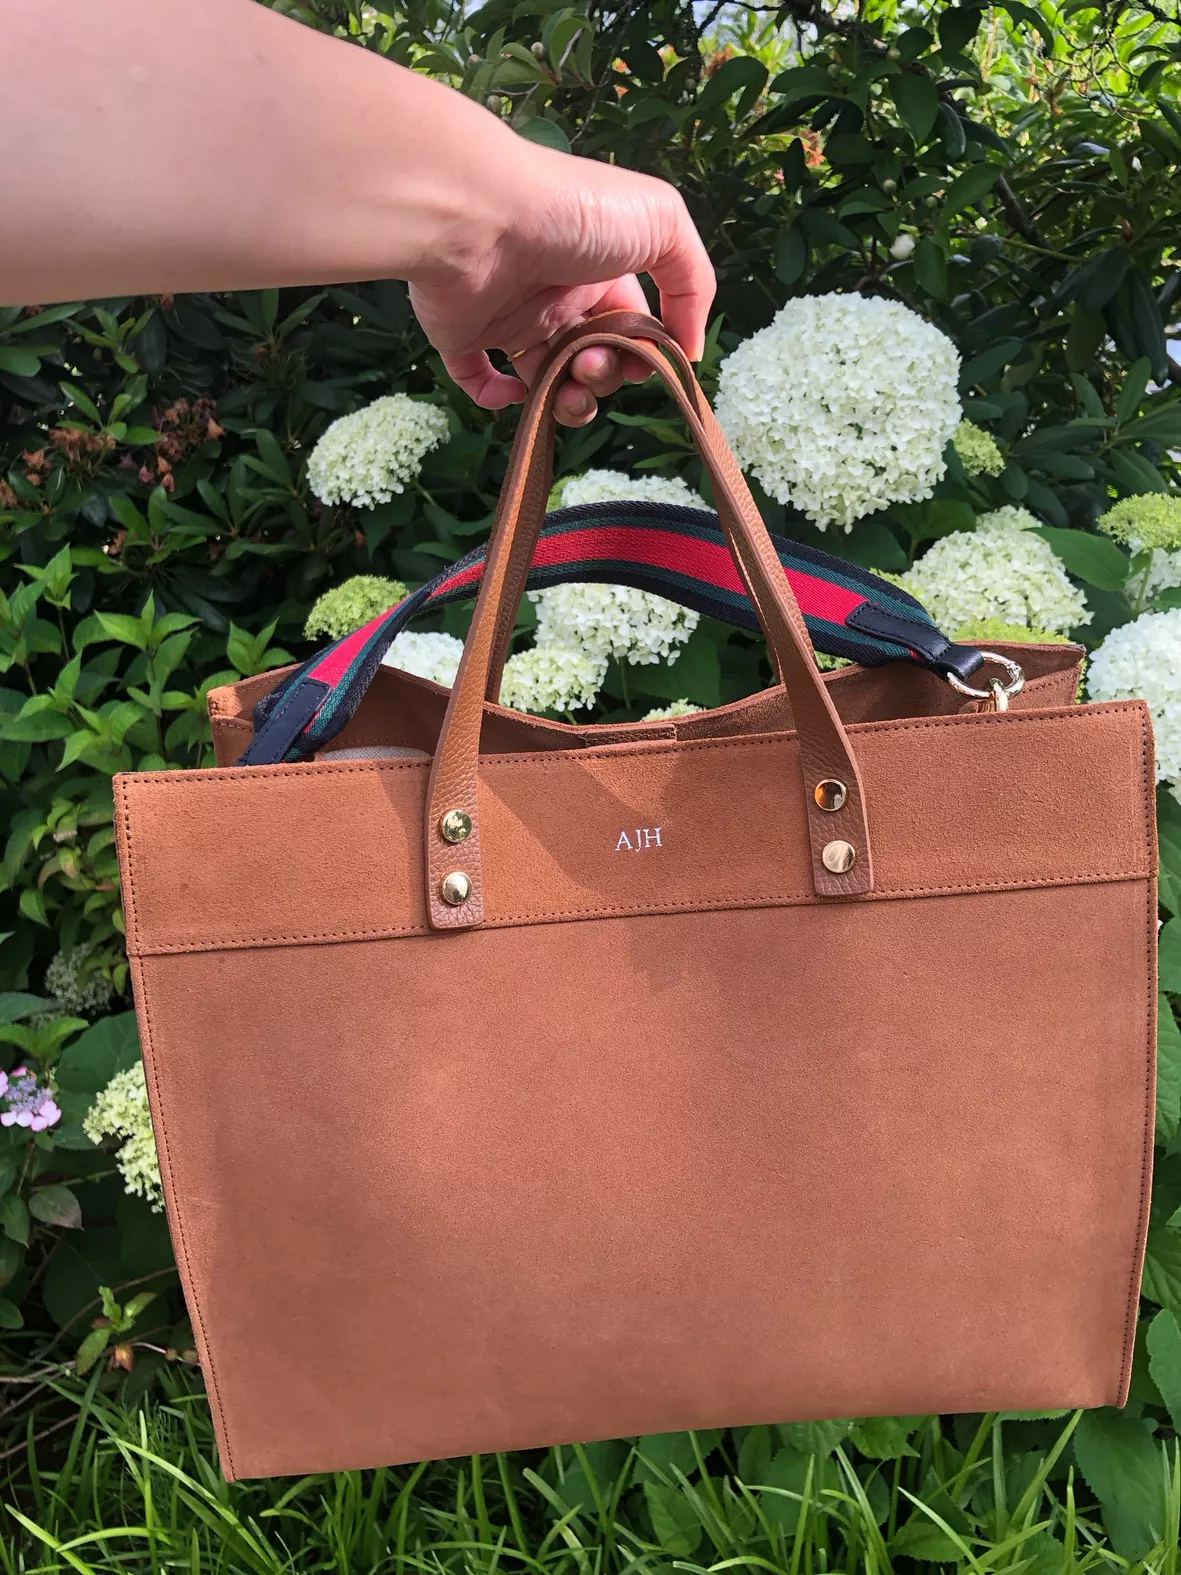 Personalized Leather Tote Bag